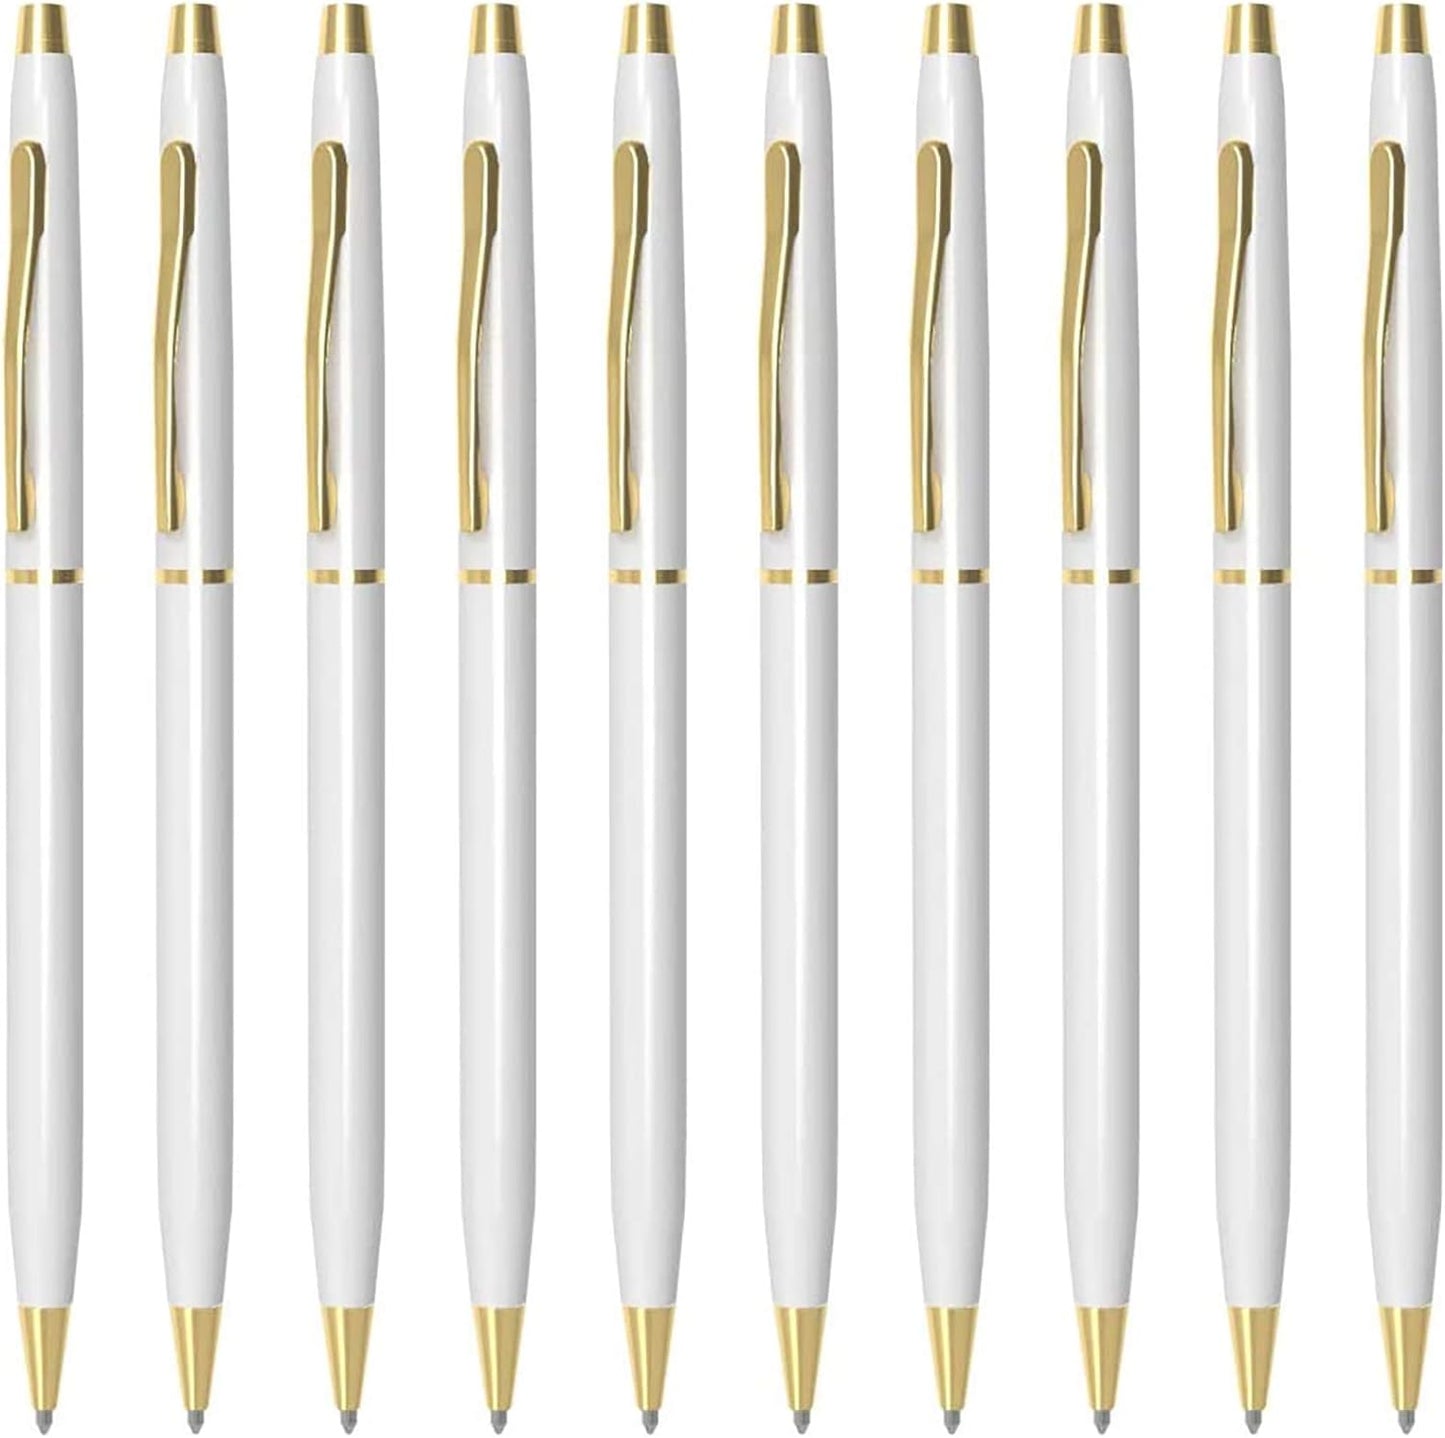 Cambond Pens Ballpoint Pens - 1.0 mm Medium Point Smooth Writing Office Pens for Men Women Police Uniform Office Business, 10 Pack